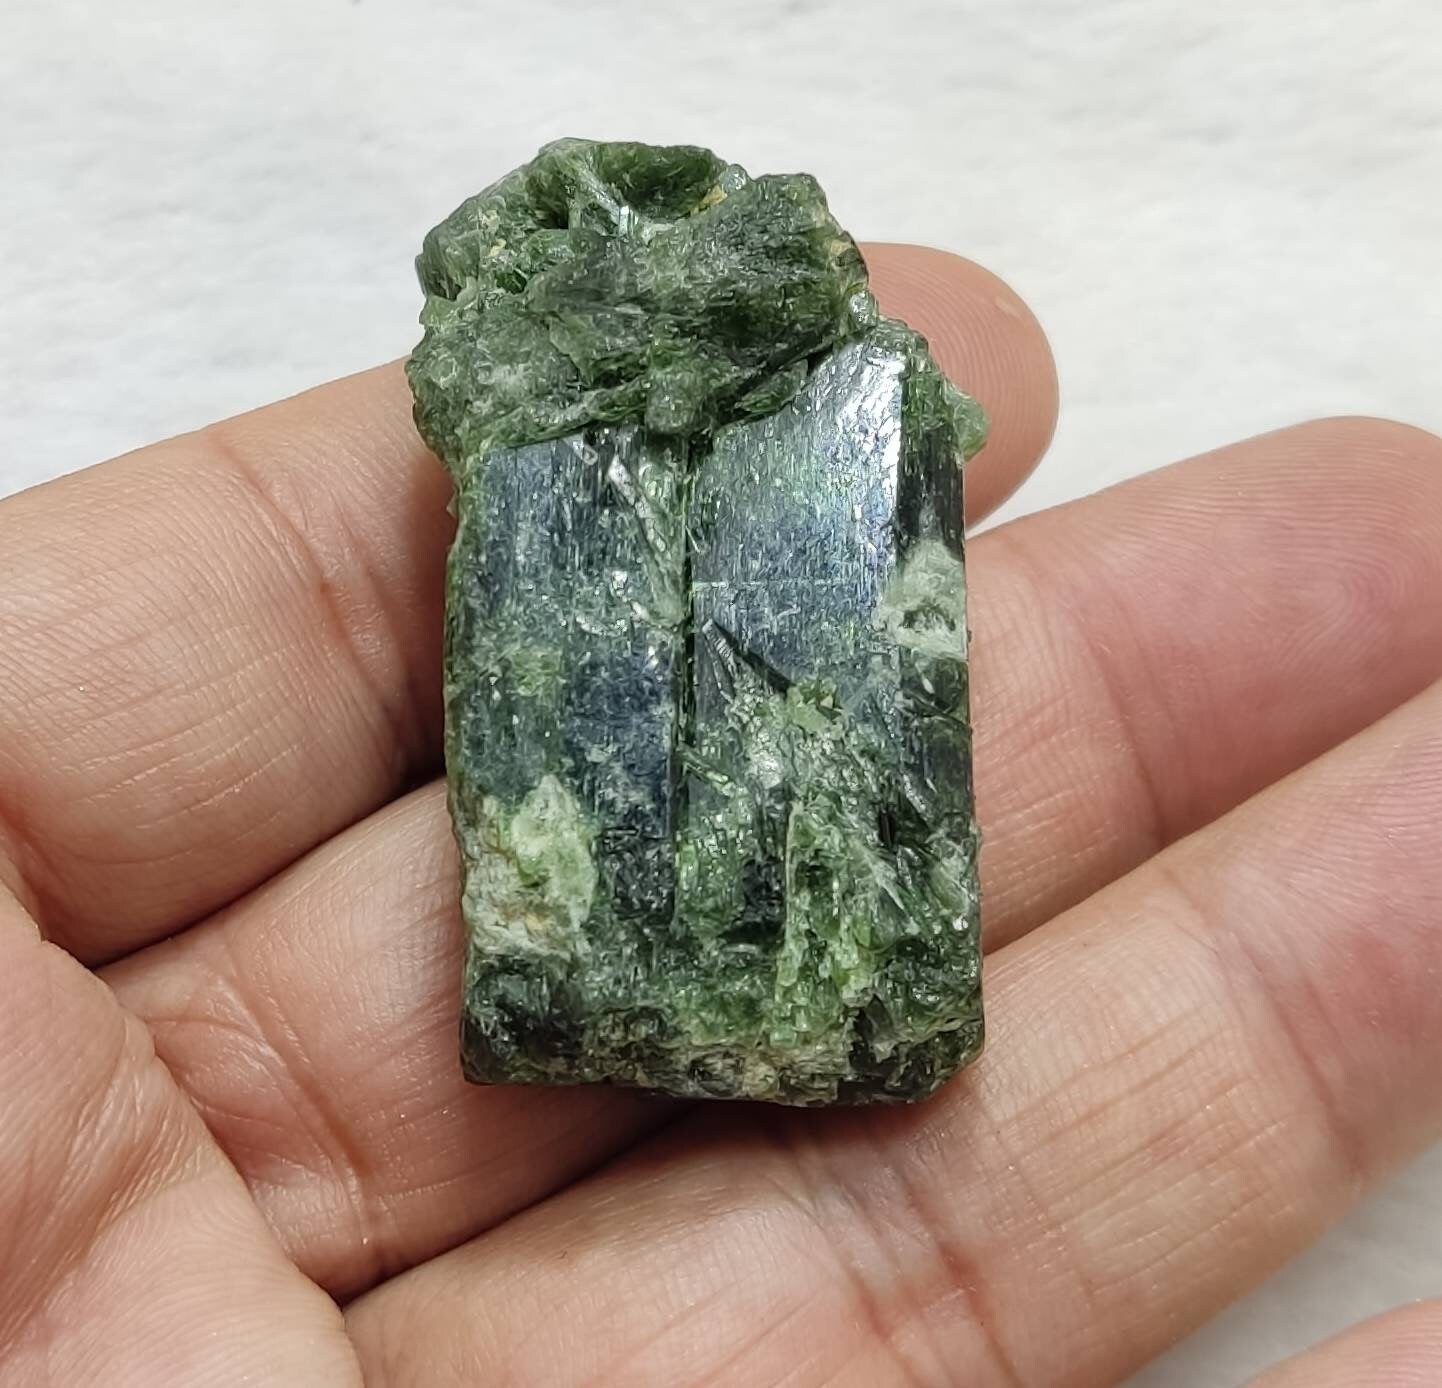 An amazing specimen of diopside crystal 42 grams